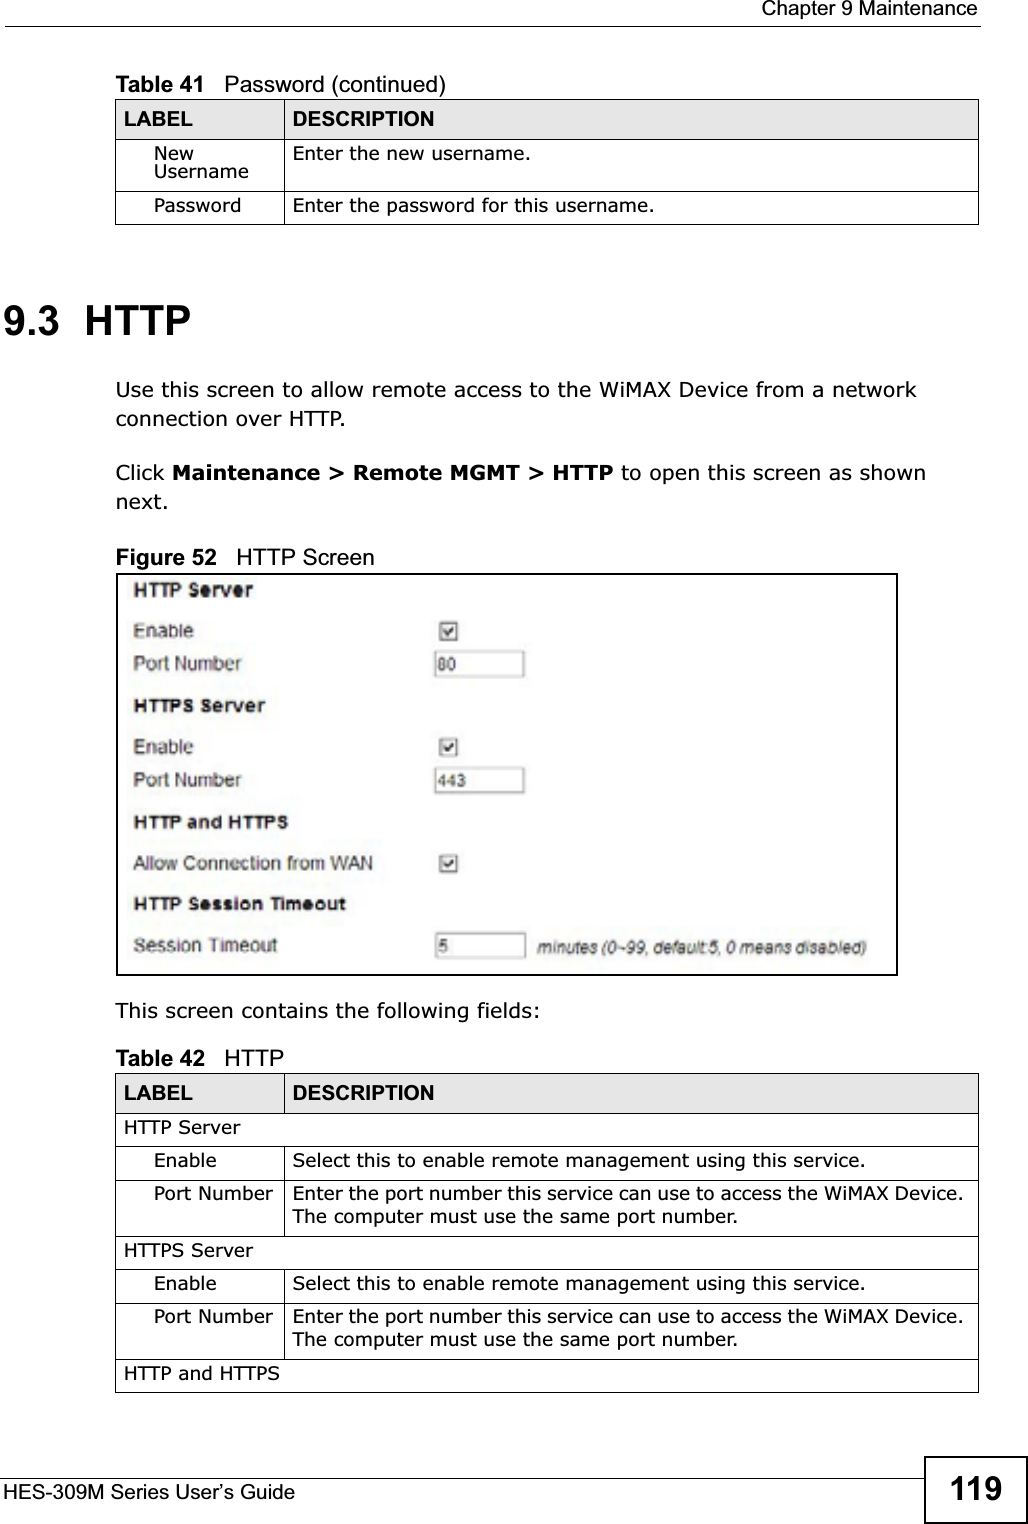  Chapter 9 MaintenanceHES-309M Series User’s Guide 1199.3  HTTPUse this screen to allow remote access to the WiMAX Device from a network connection over HTTP.Click Maintenance &gt; Remote MGMT &gt; HTTP to open this screen as shown next.Figure 52   HTTP ScreenThis screen contains the following fields:NewUsername Enter the new username.Password Enter the password for this username.Table 41   Password (continued)LABEL DESCRIPTIONTable 42   HTTPLABEL DESCRIPTIONHTTP ServerEnable Select this to enable remote management using this service.Port Number Enter the port number this service can use to access the WiMAX Device. The computer must use the same port number.HTTPS ServerEnable Select this to enable remote management using this service.Port Number Enter the port number this service can use to access the WiMAX Device. The computer must use the same port number.HTTP and HTTPS